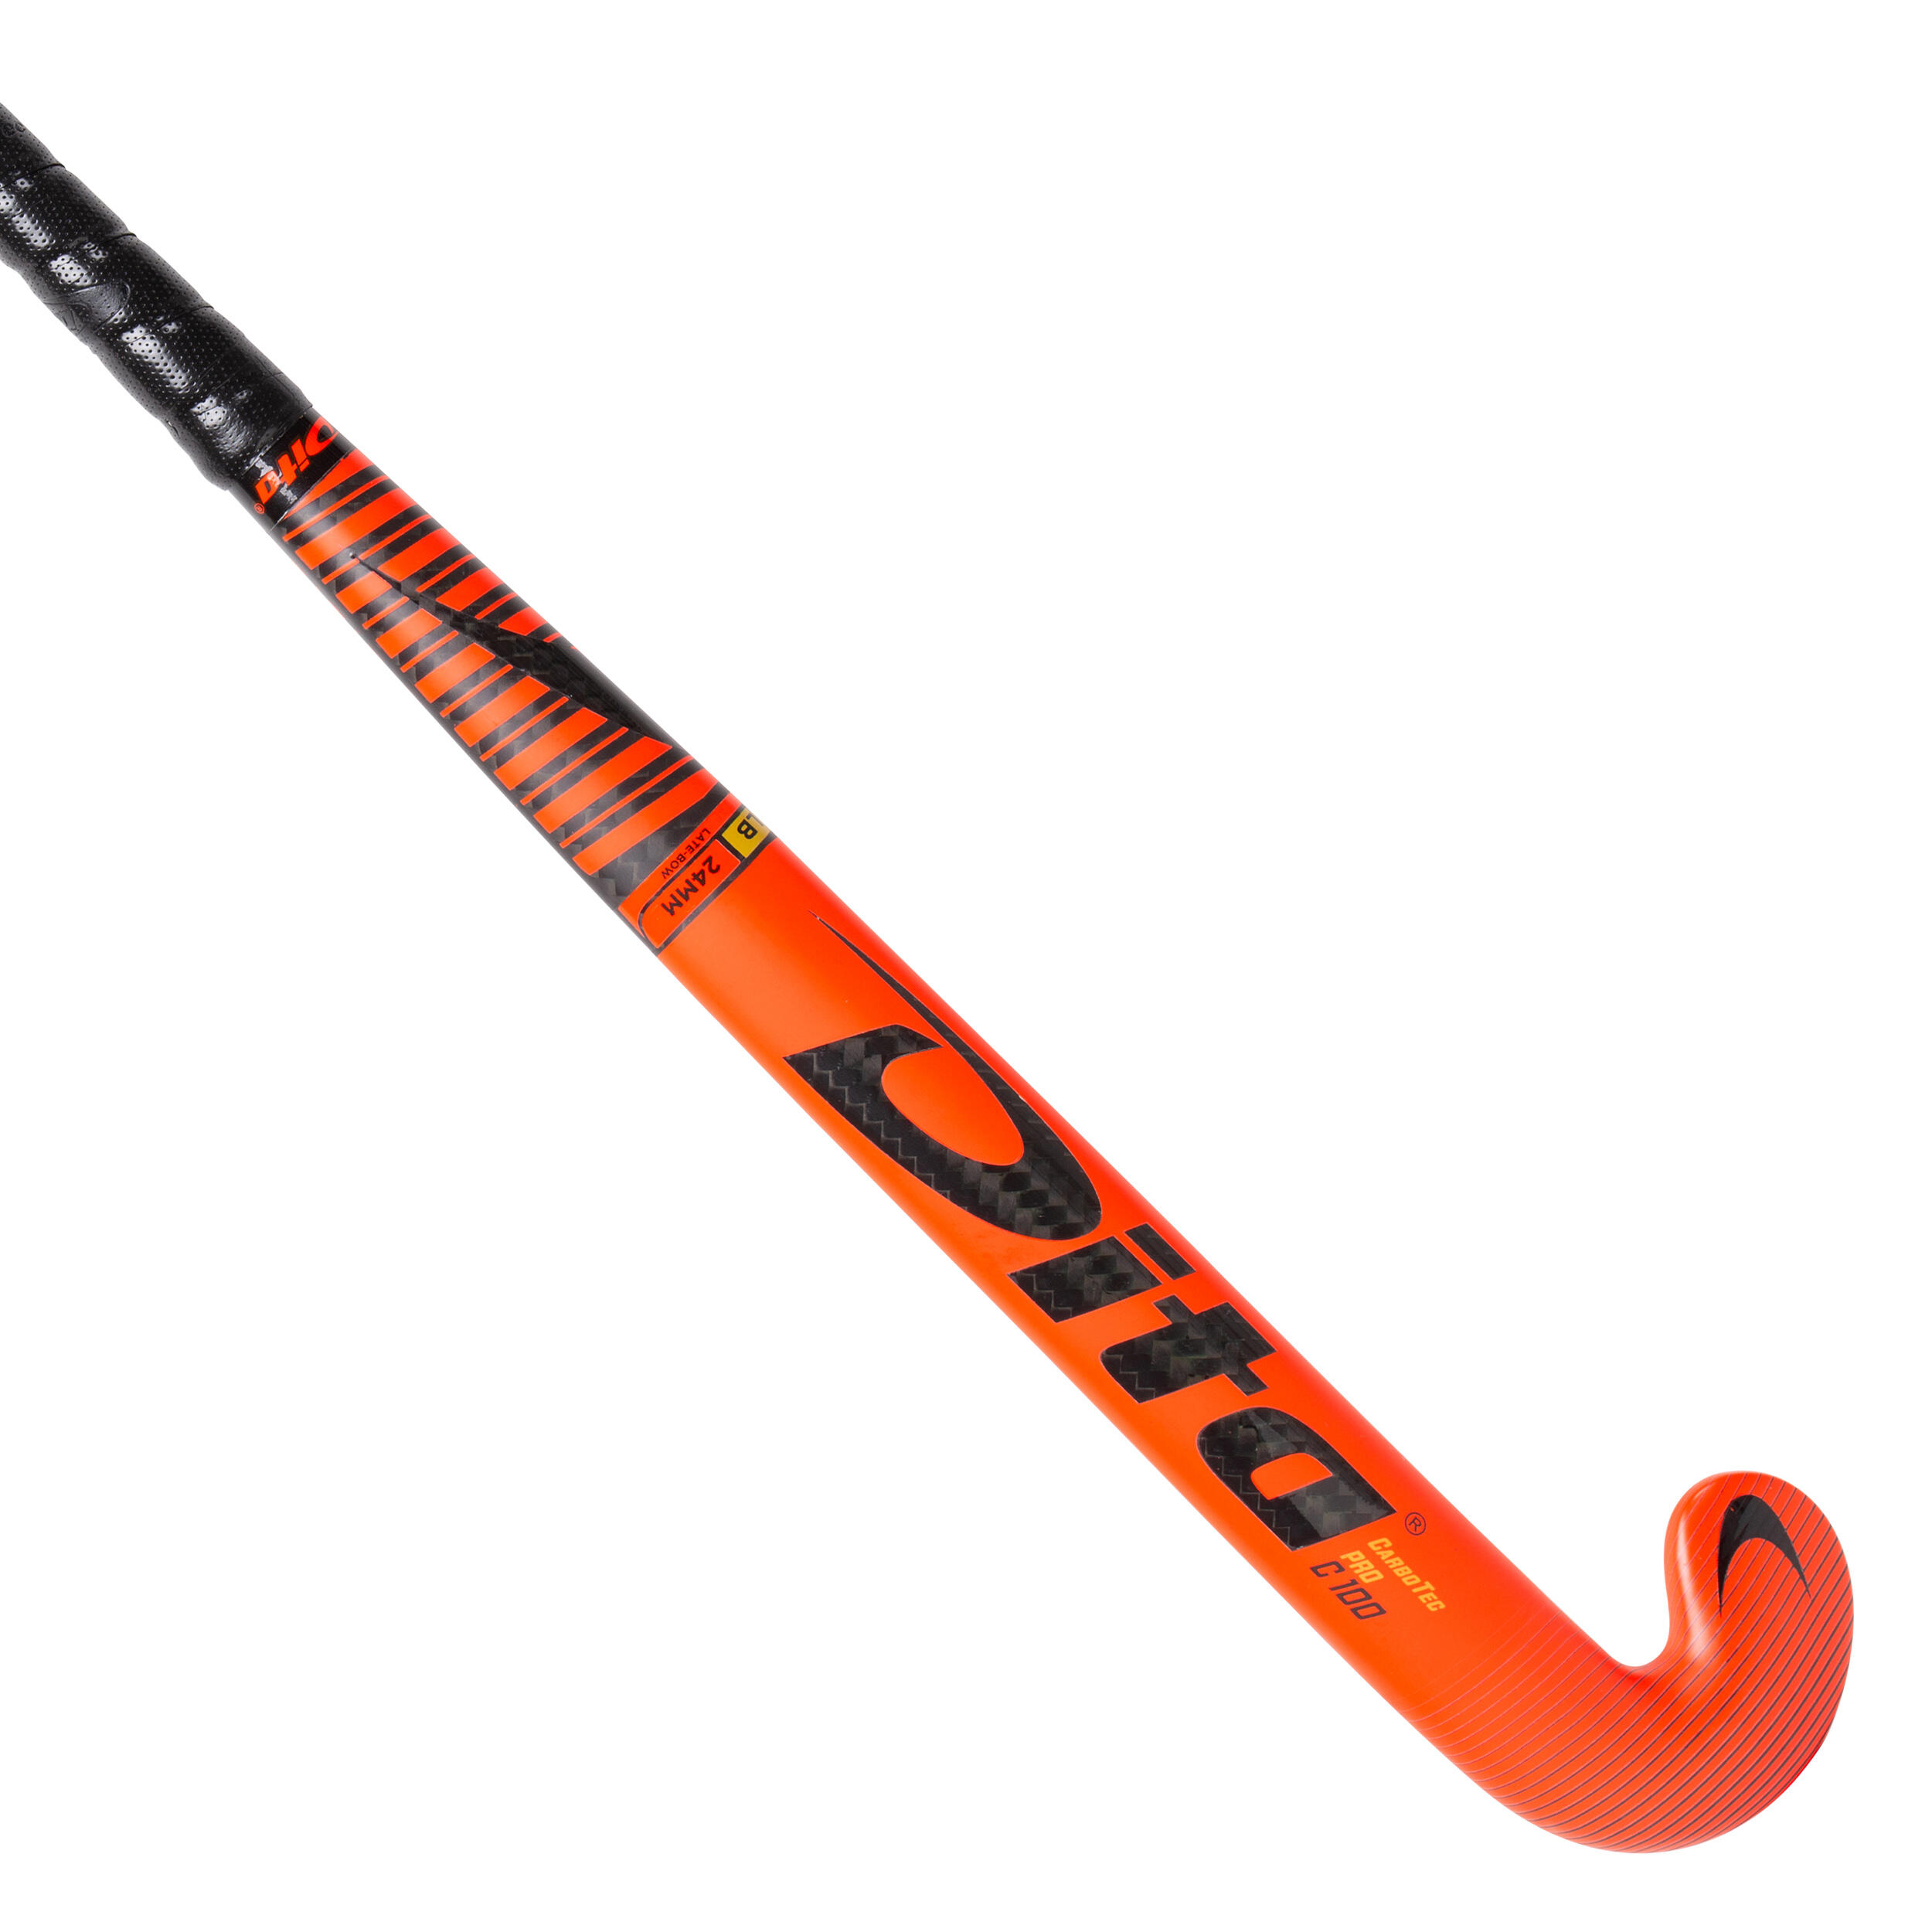 Adult Advanced 100% Carbon Low Bow Field Hockey Stick CarbotecPro C100 - Red 1/9